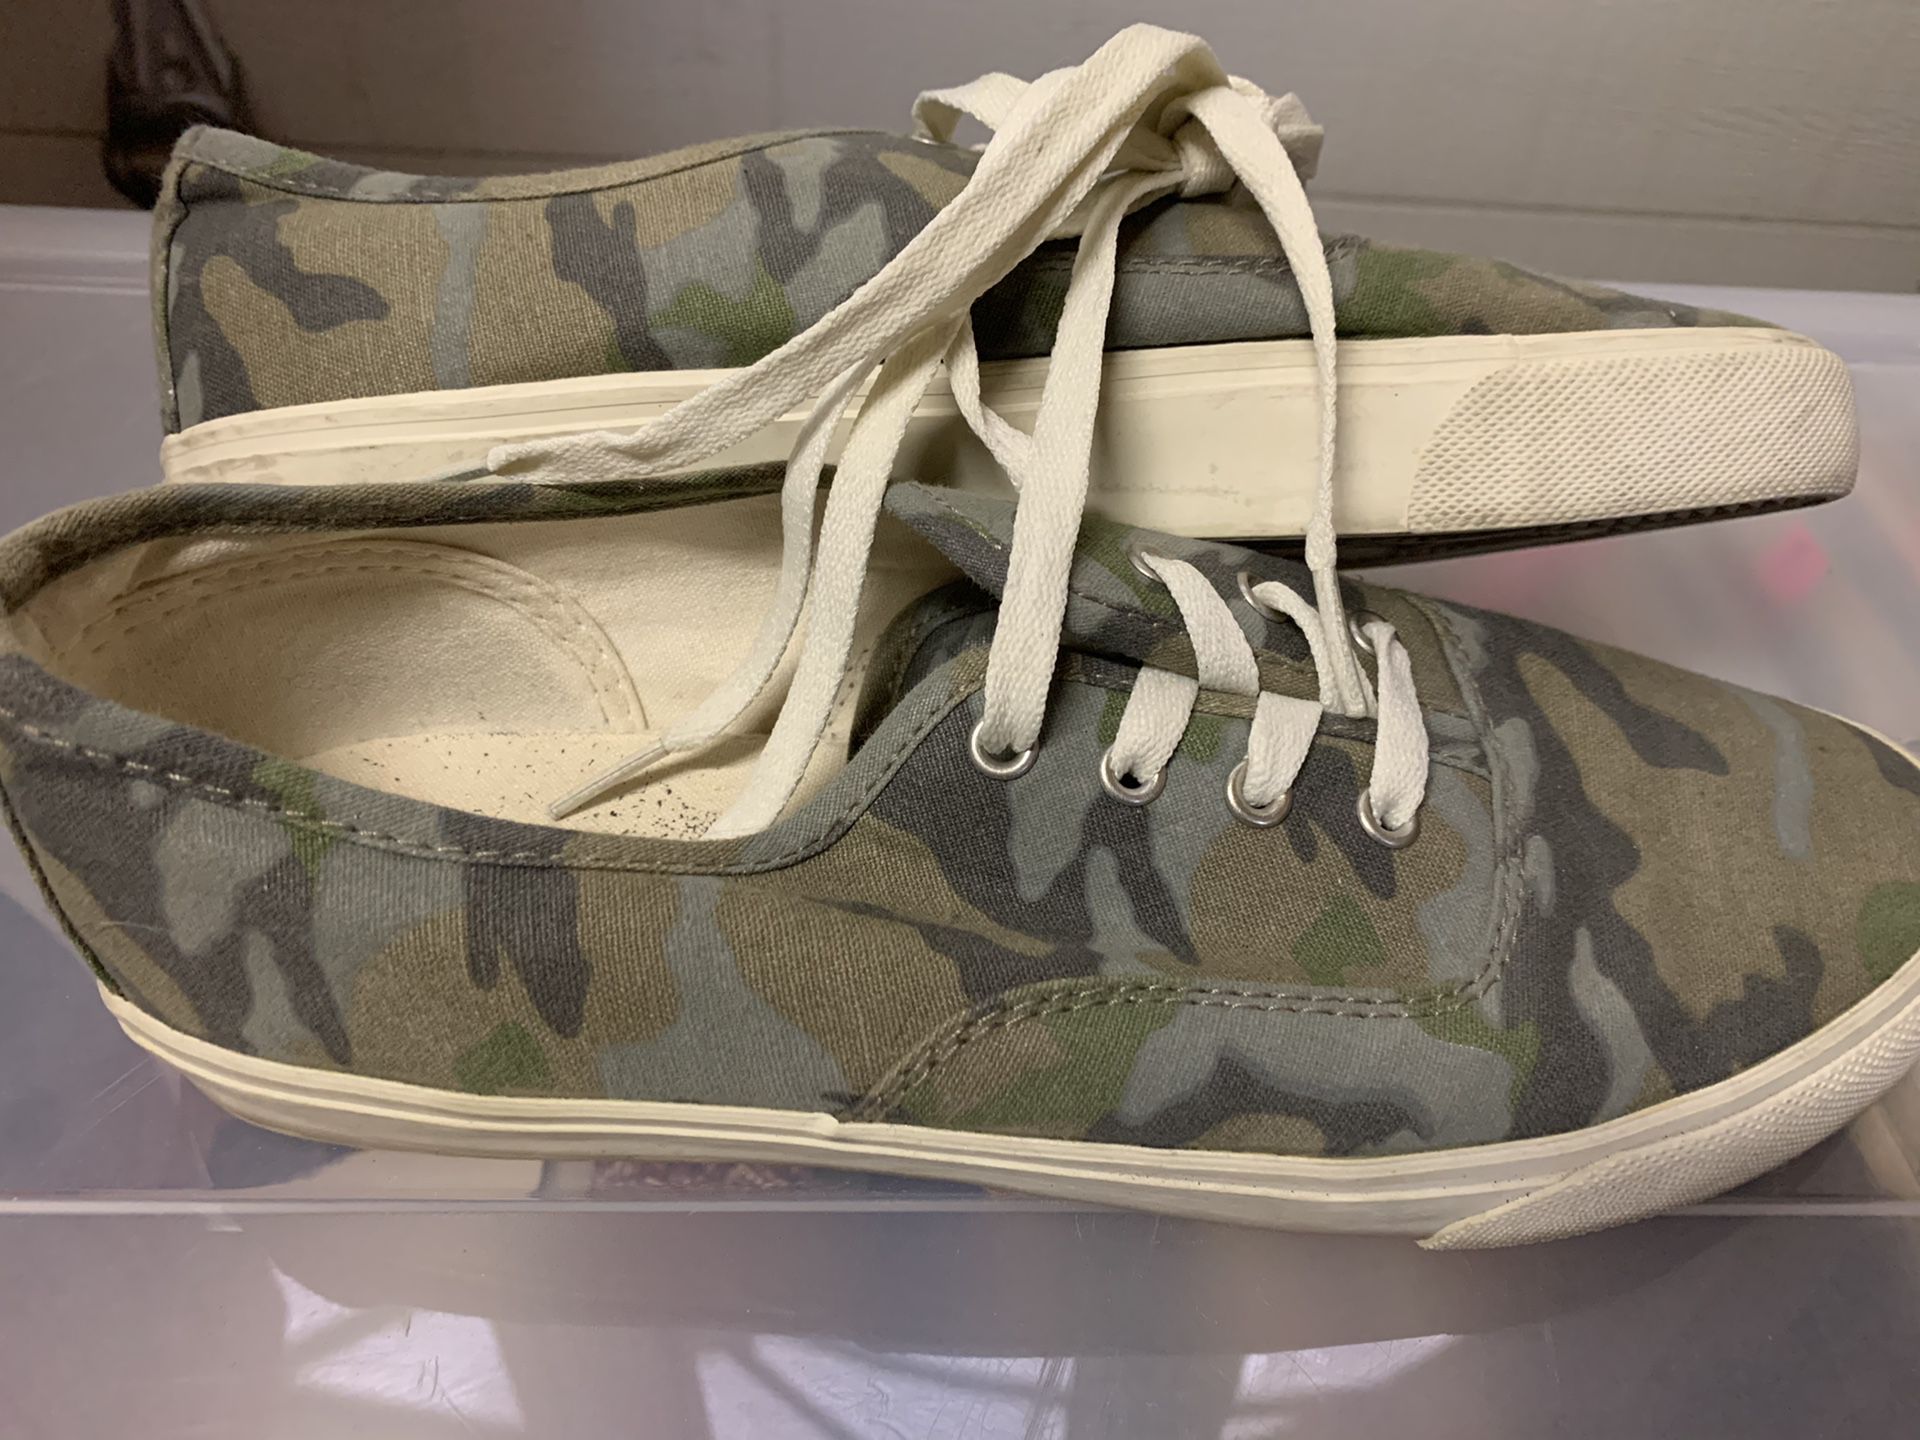 American Eagle Military Camouflage Sneakers! Vans Style Shoes Women’s 9 Like New